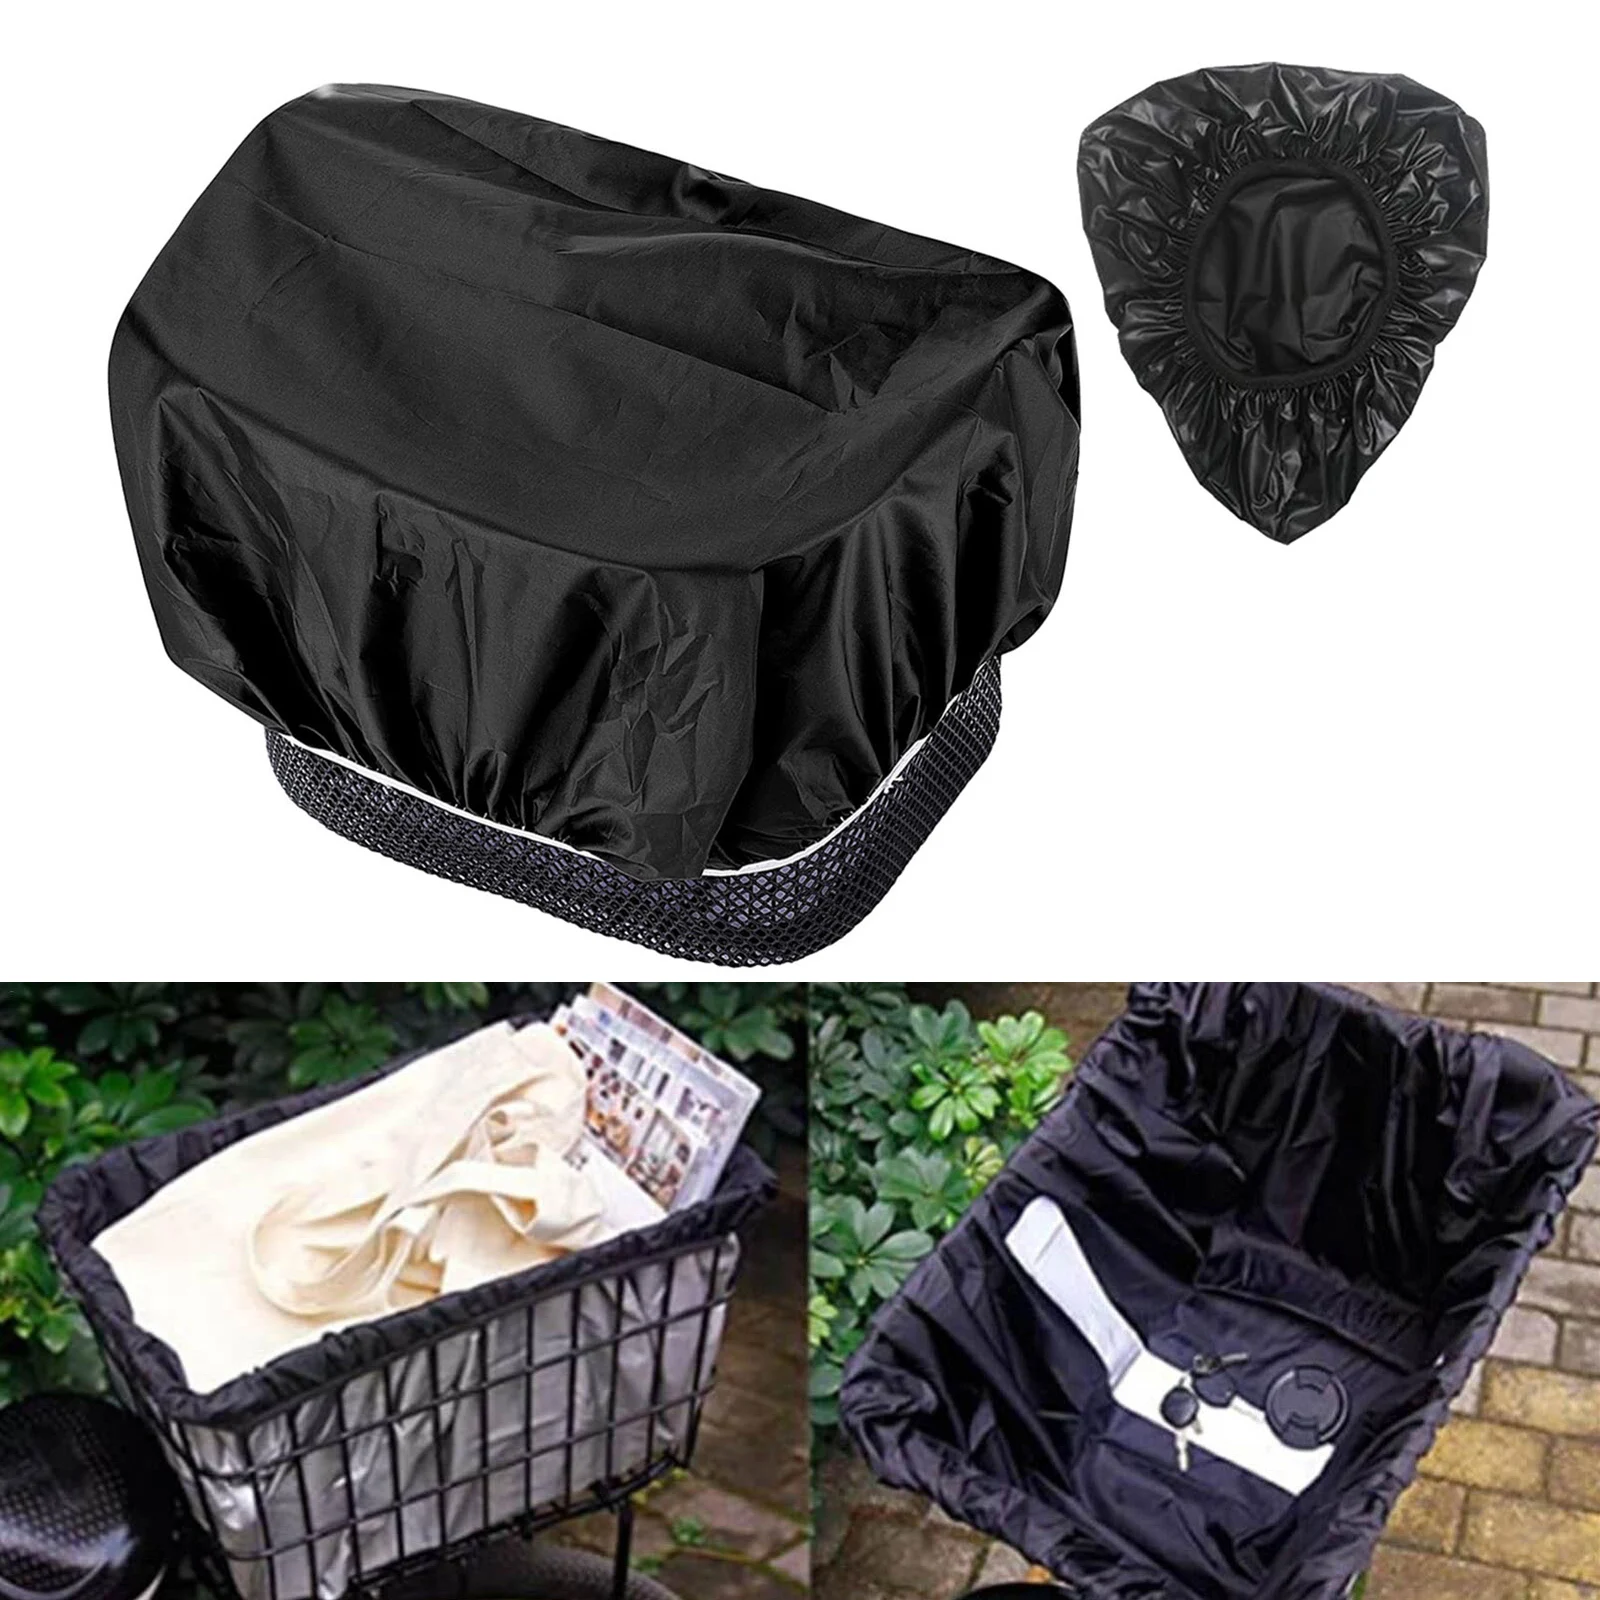 

Mountain MTB Road Bicycle Bike Cover Saddle And Basket 200g/set Black Oxford-Cloth Rainproof Waterproof For Most Bicycle Baskets